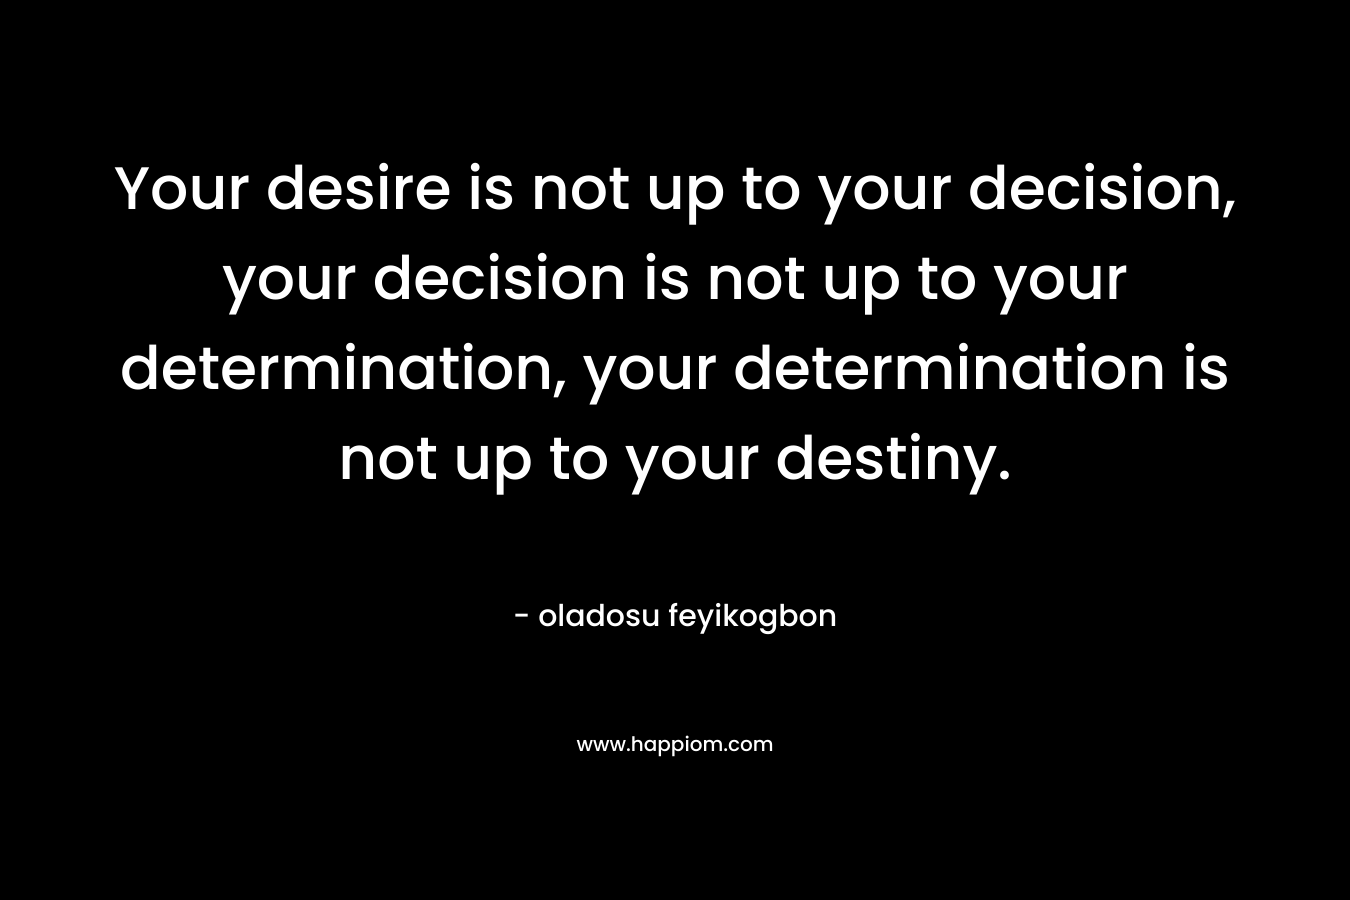 Your desire is not up to your decision, your decision is not up to your determination, your determination is not up to your destiny.